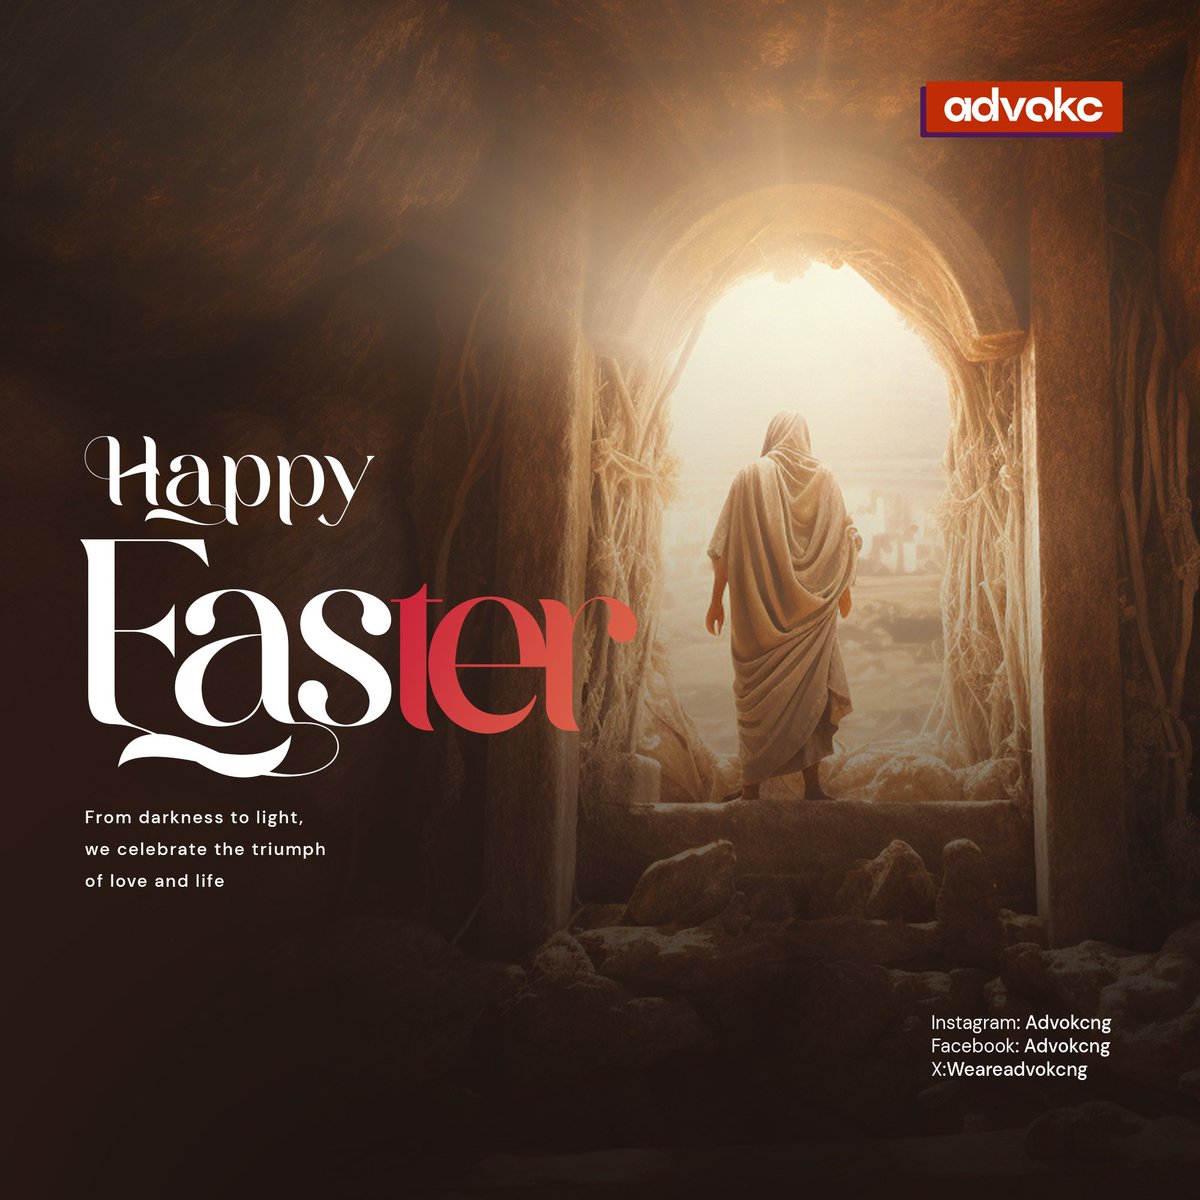 He is Arisen! Rejoice, for Easter commemorating the resurrection of Jesus Christ, symbolizes triumph over death and offers hope, redemption, spiritual renewal and the promise of new beginnings.